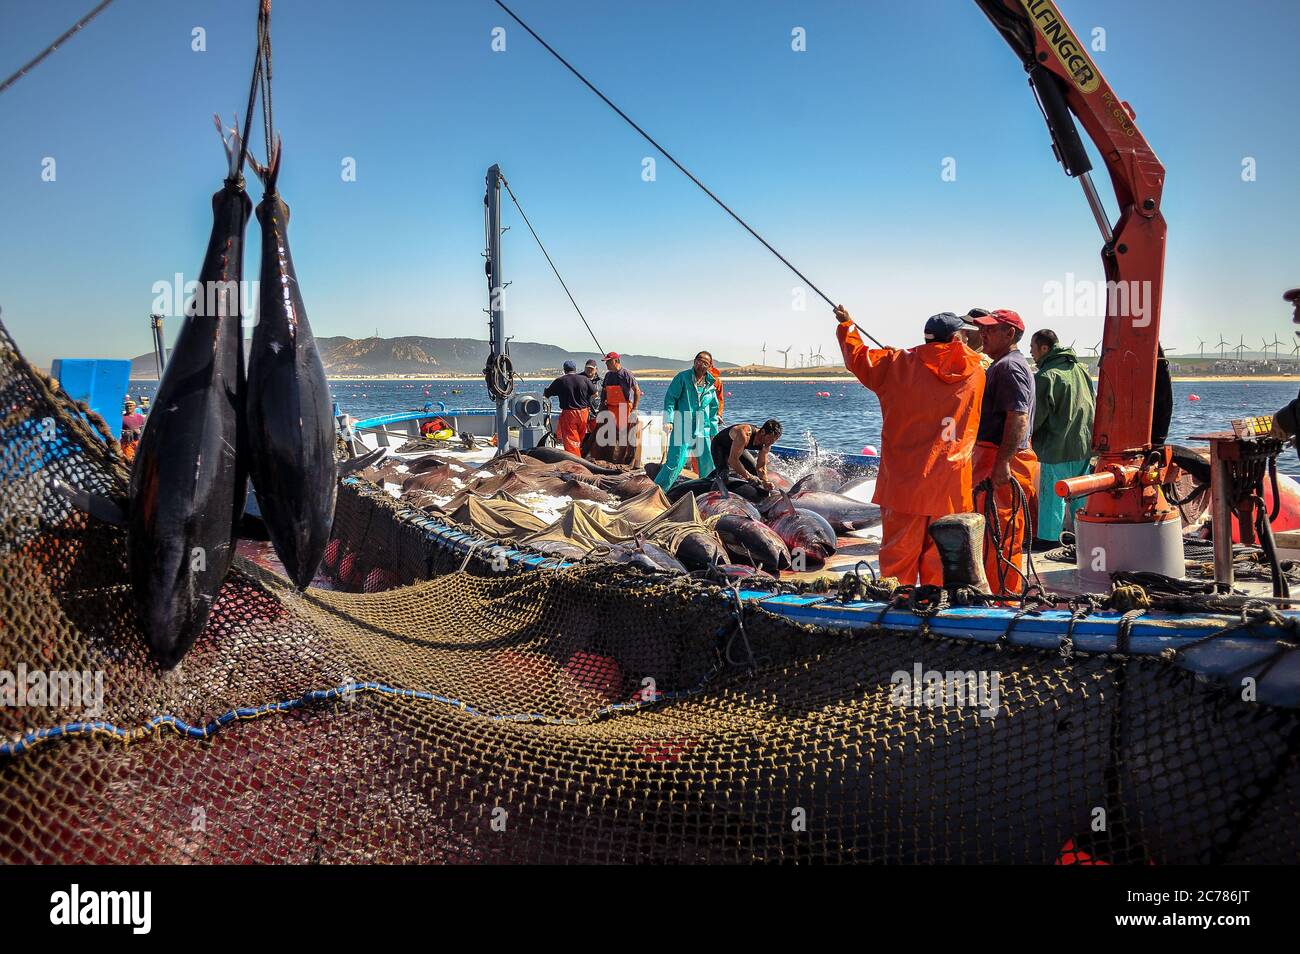 Two Bluefin tuna are hoisted by the tail to a near by vessel were Japanese experts look and classify the best catches that will be exported to their homeland from Zahara de los Atunes, Spain. Date: 06/06/2012. Photographer: Xabier Mikel Laburu. Stock Photo